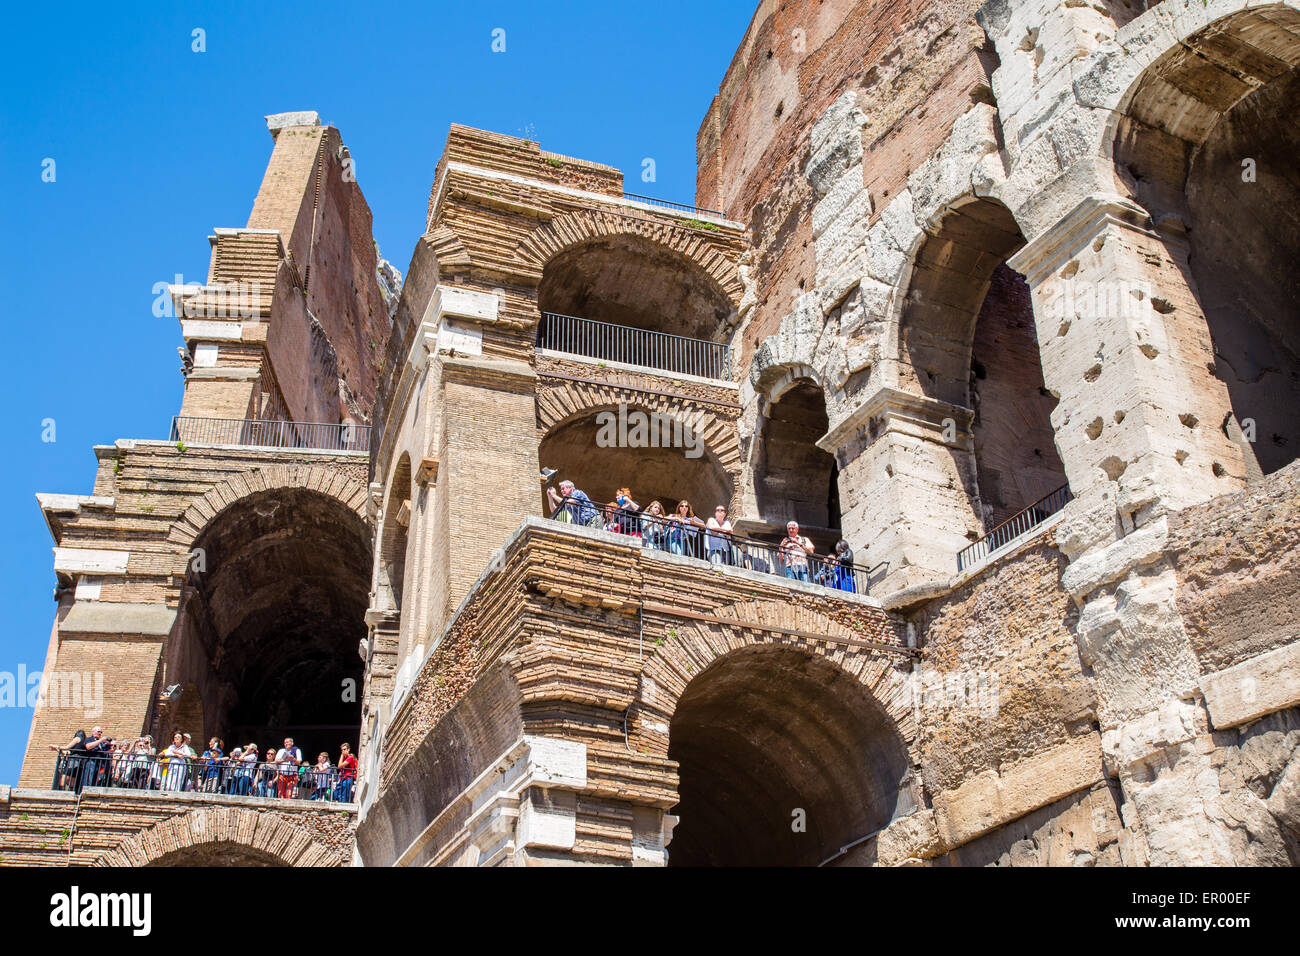 Tourists visiting the Colosseum amphitheatre in Rome Stock Photo